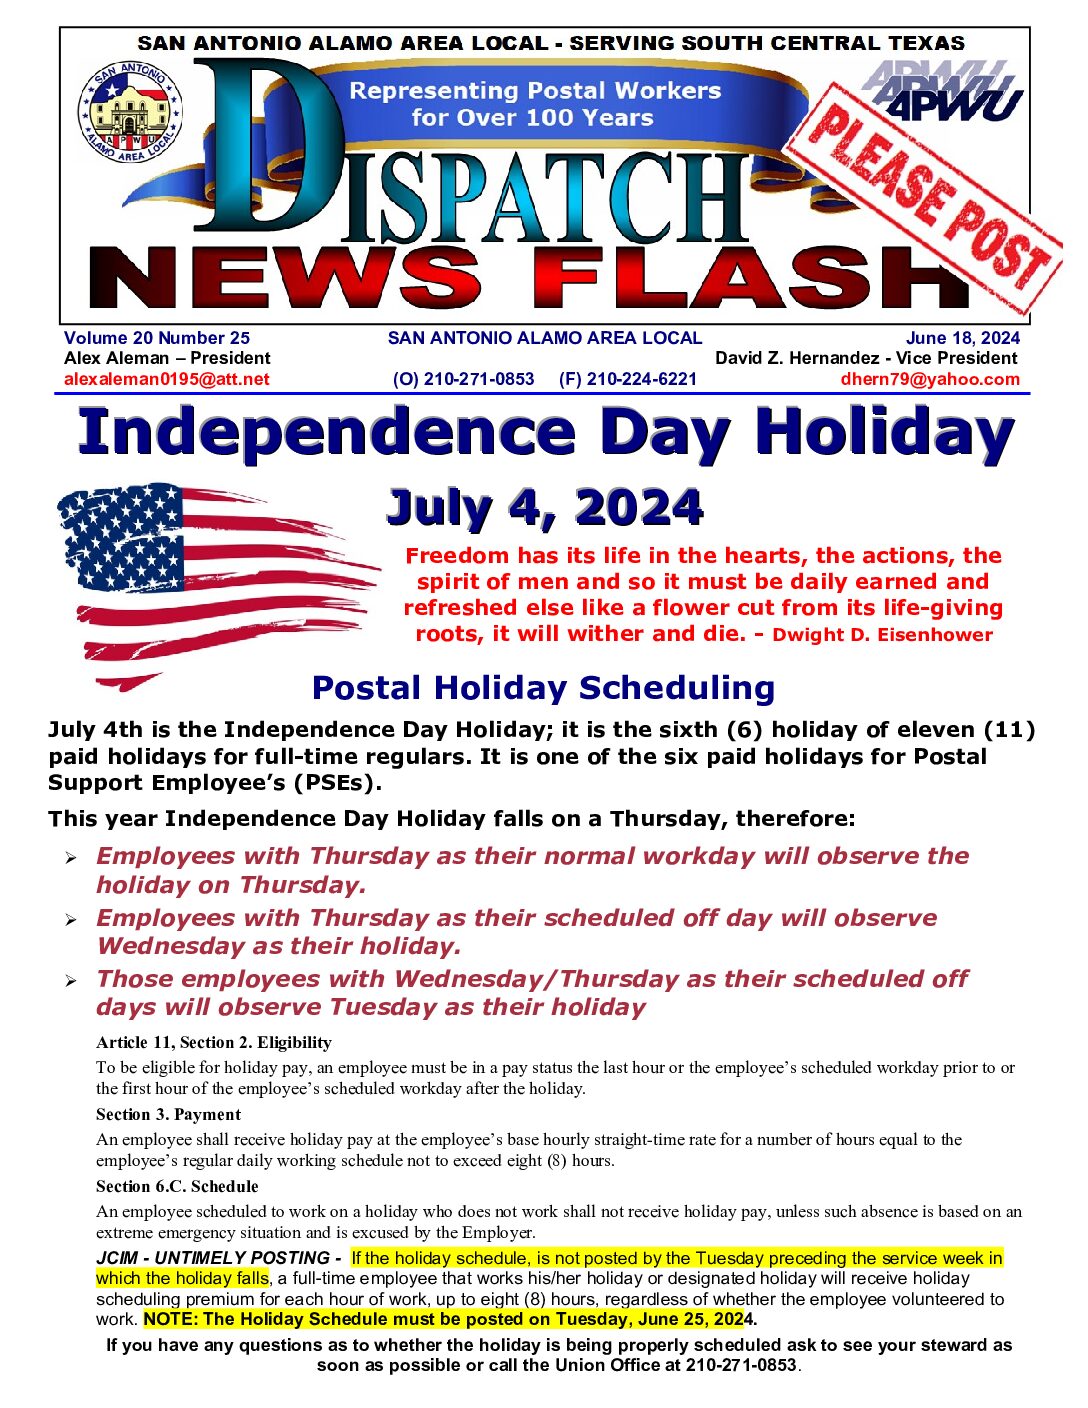 NewsFlash 20-25 Independence Day Holiday Scheduling - 